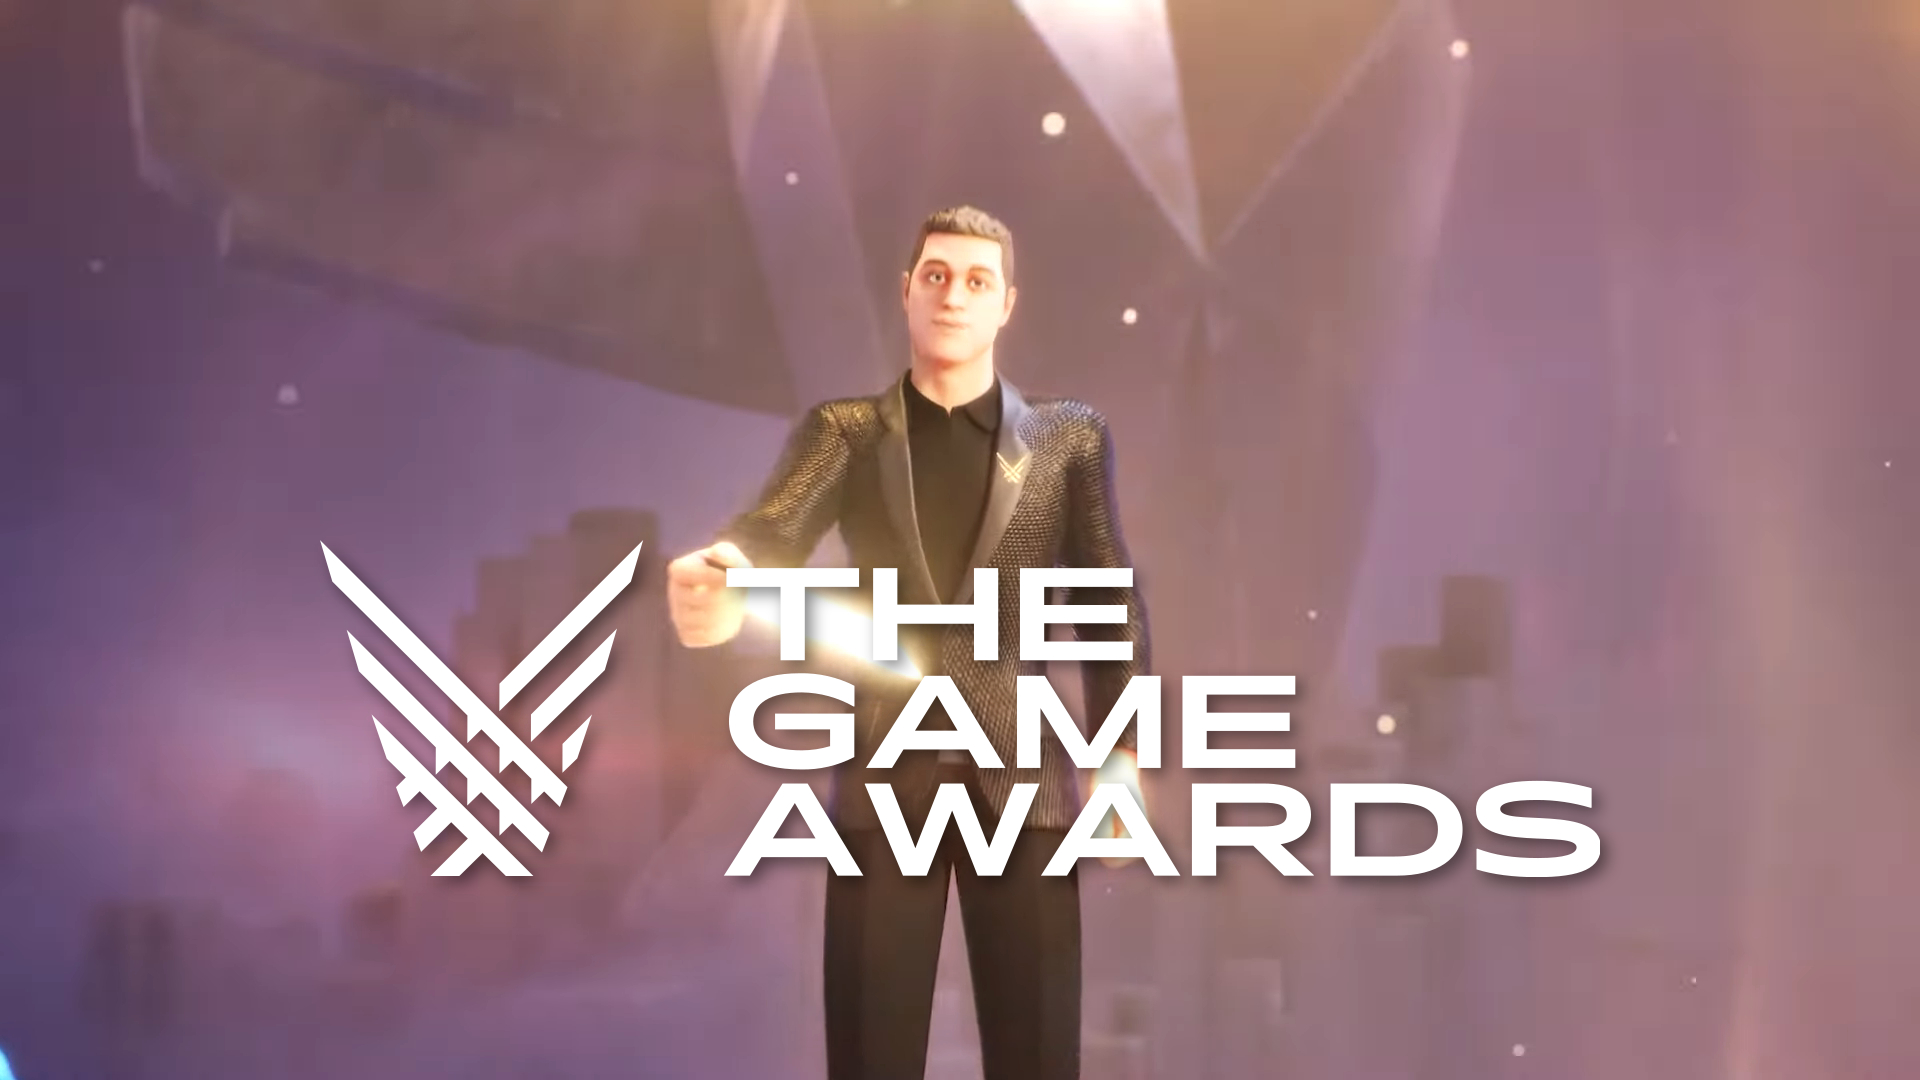 Fortnite Nominated For 4 Awards at The Game Awards 2019